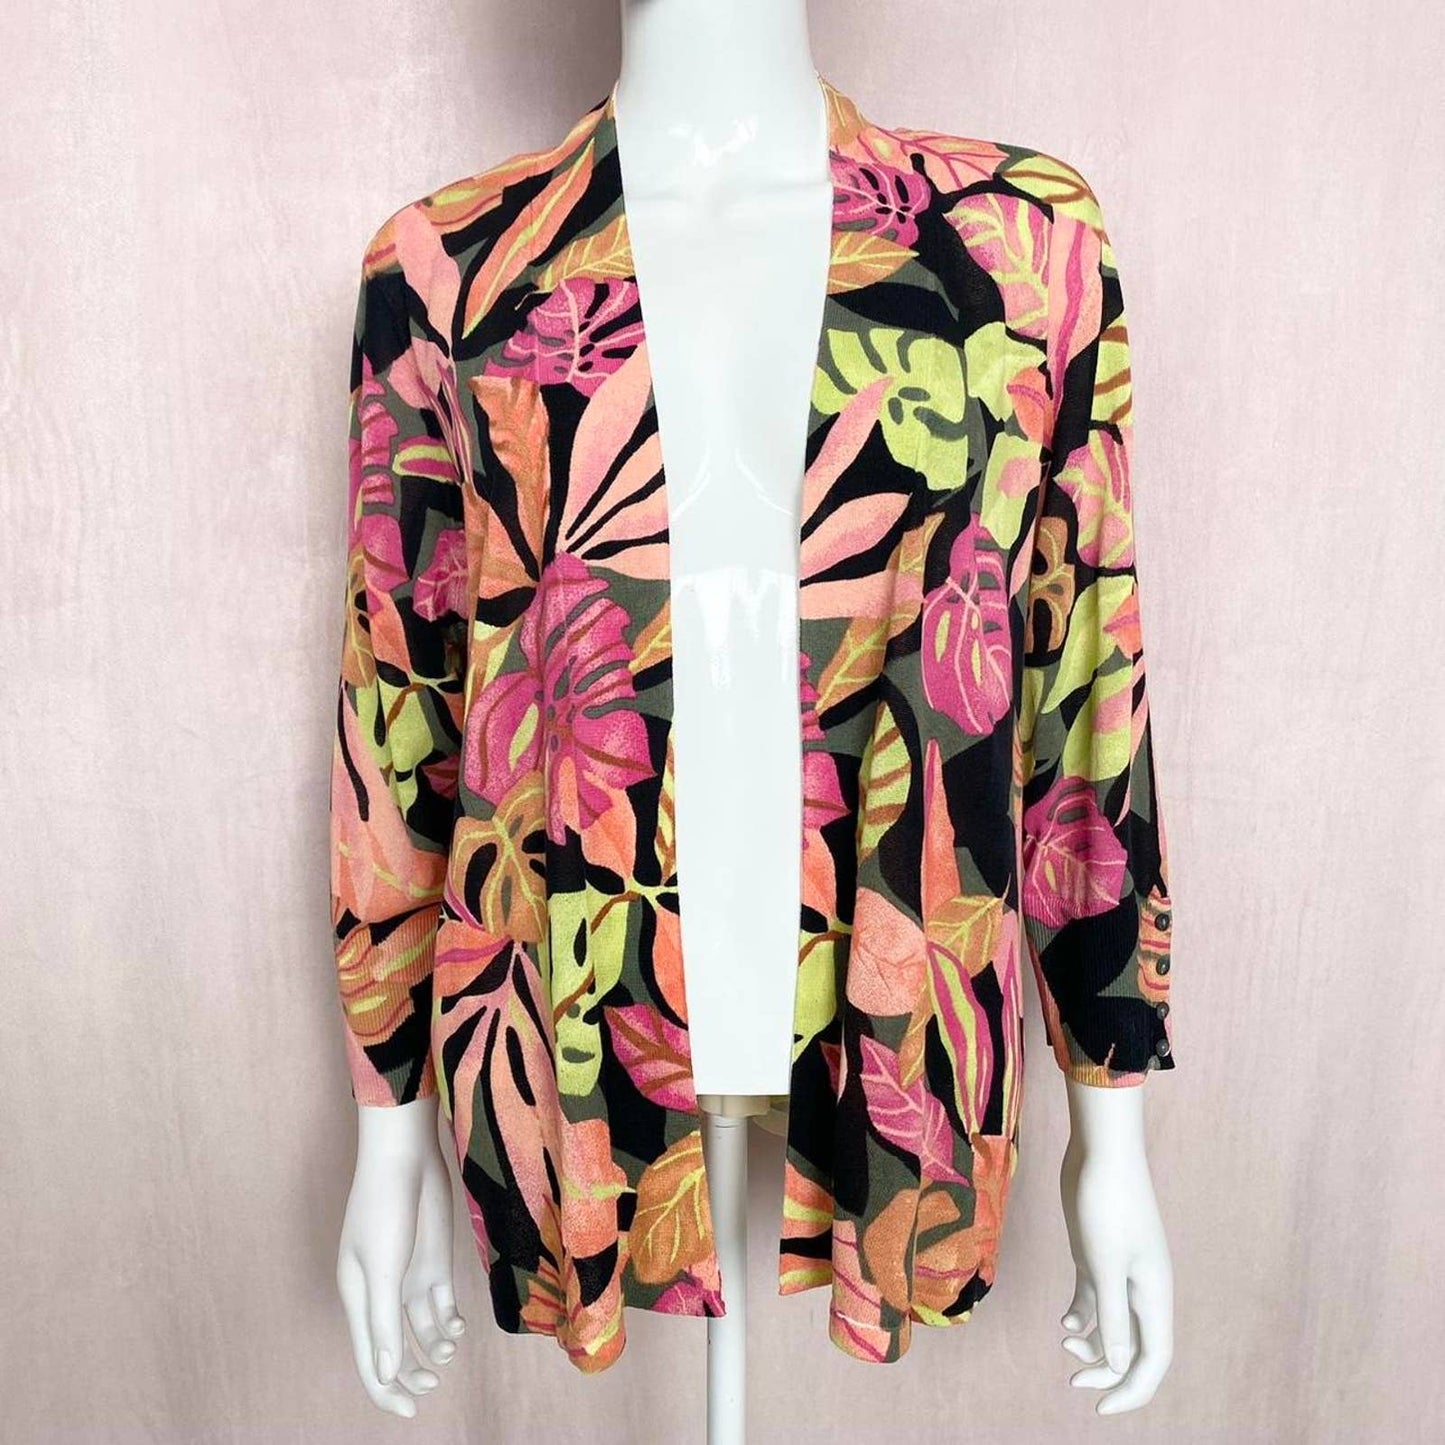 Secondhand Chico’s Tropical Floral Open Cardigan Sweater, Size Large